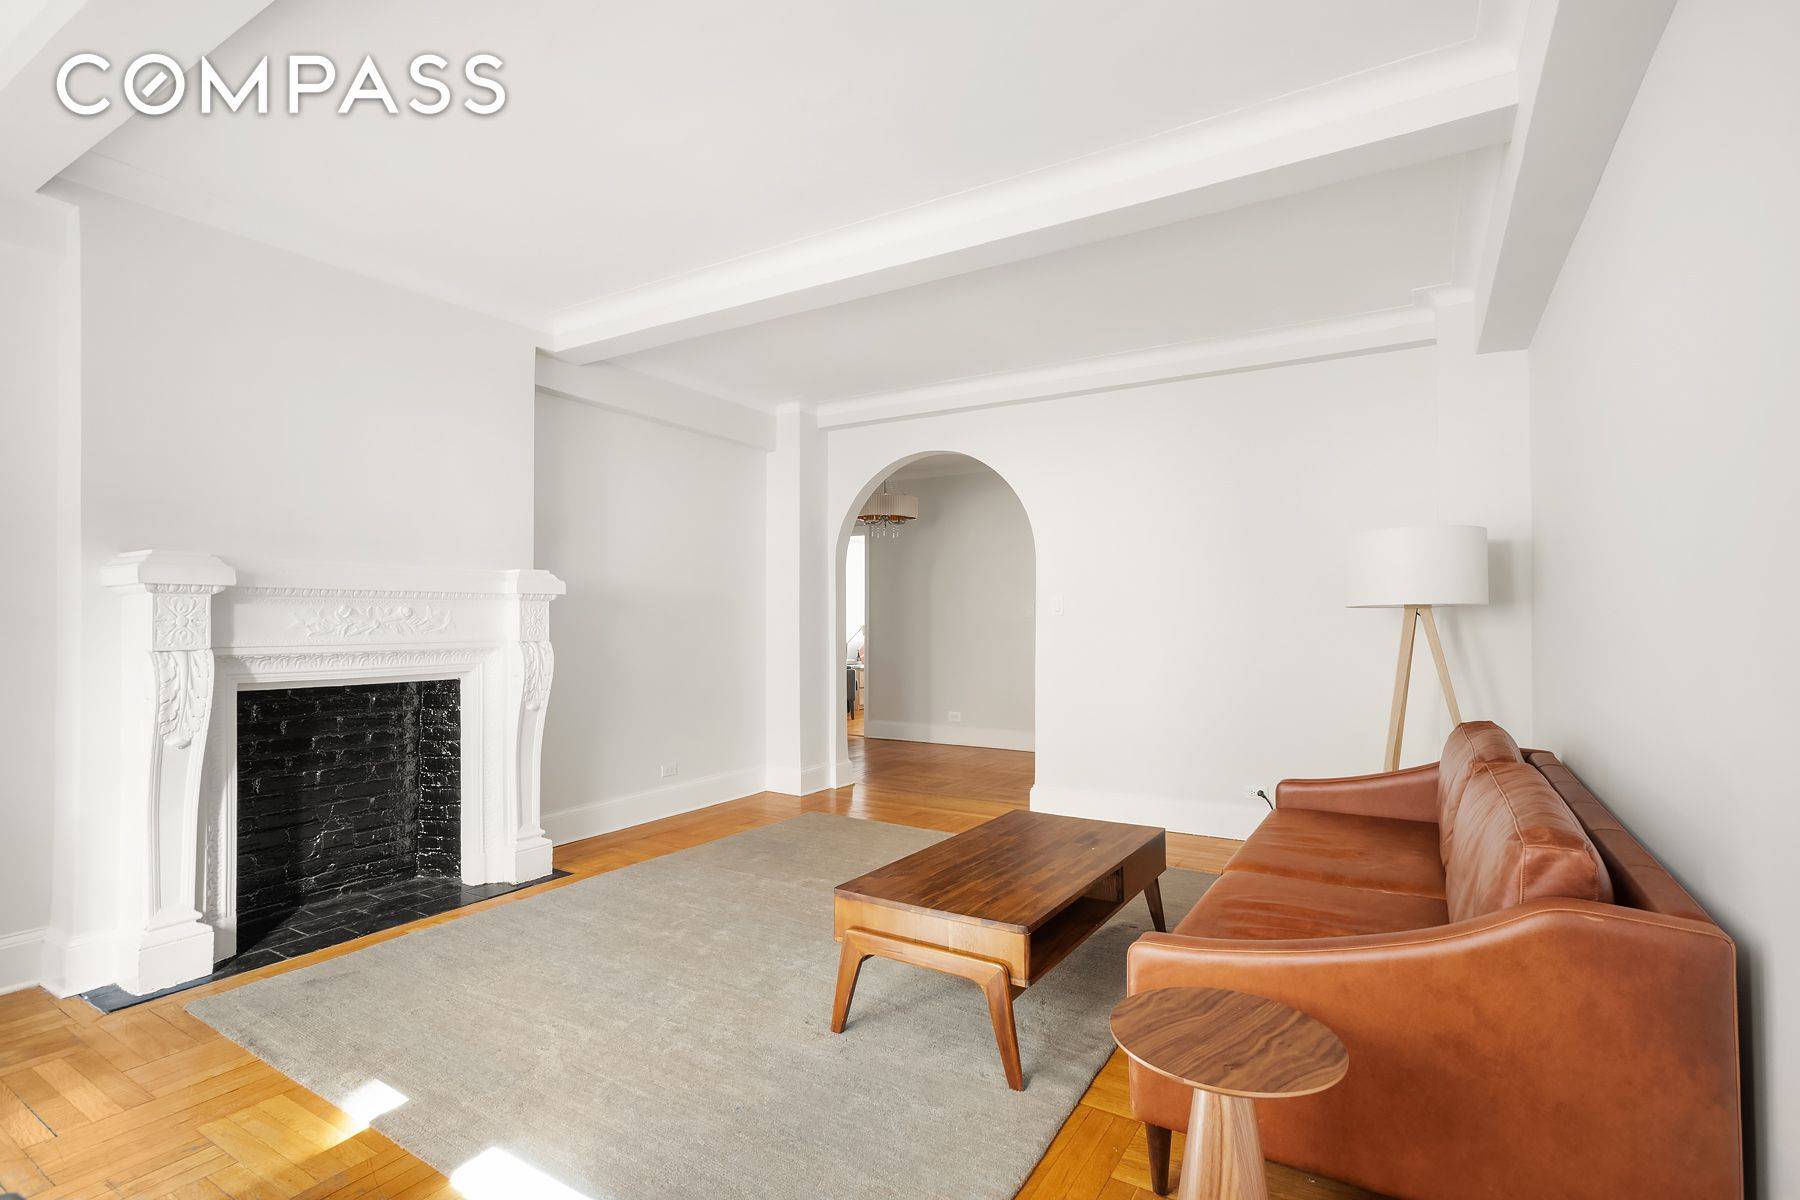 Residence 8C at 327 Central Park West has a Grand Salon feeling.